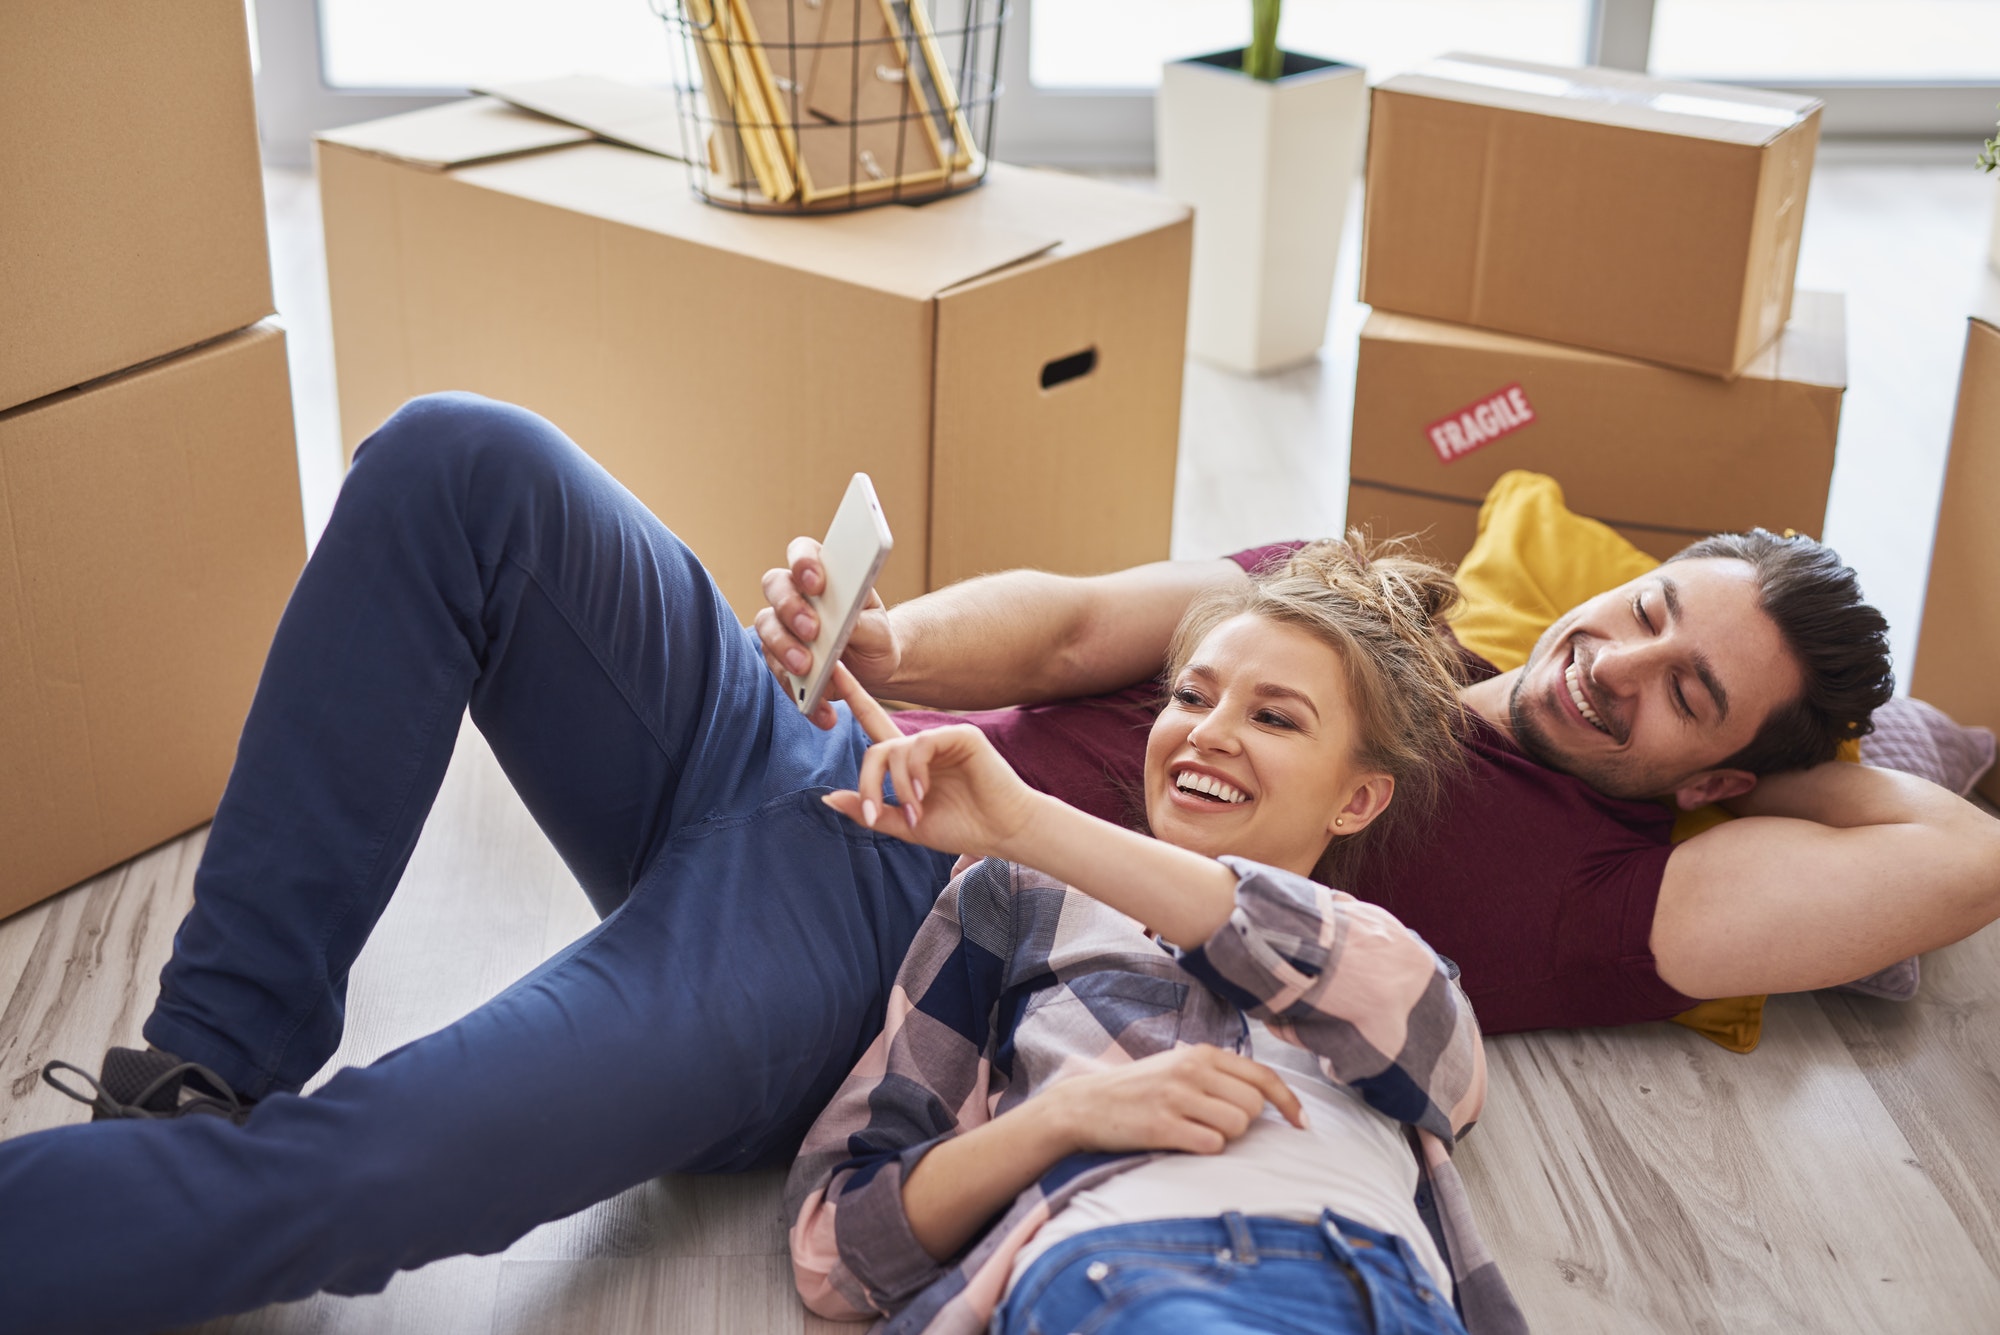 Young people returned to renting in 2019